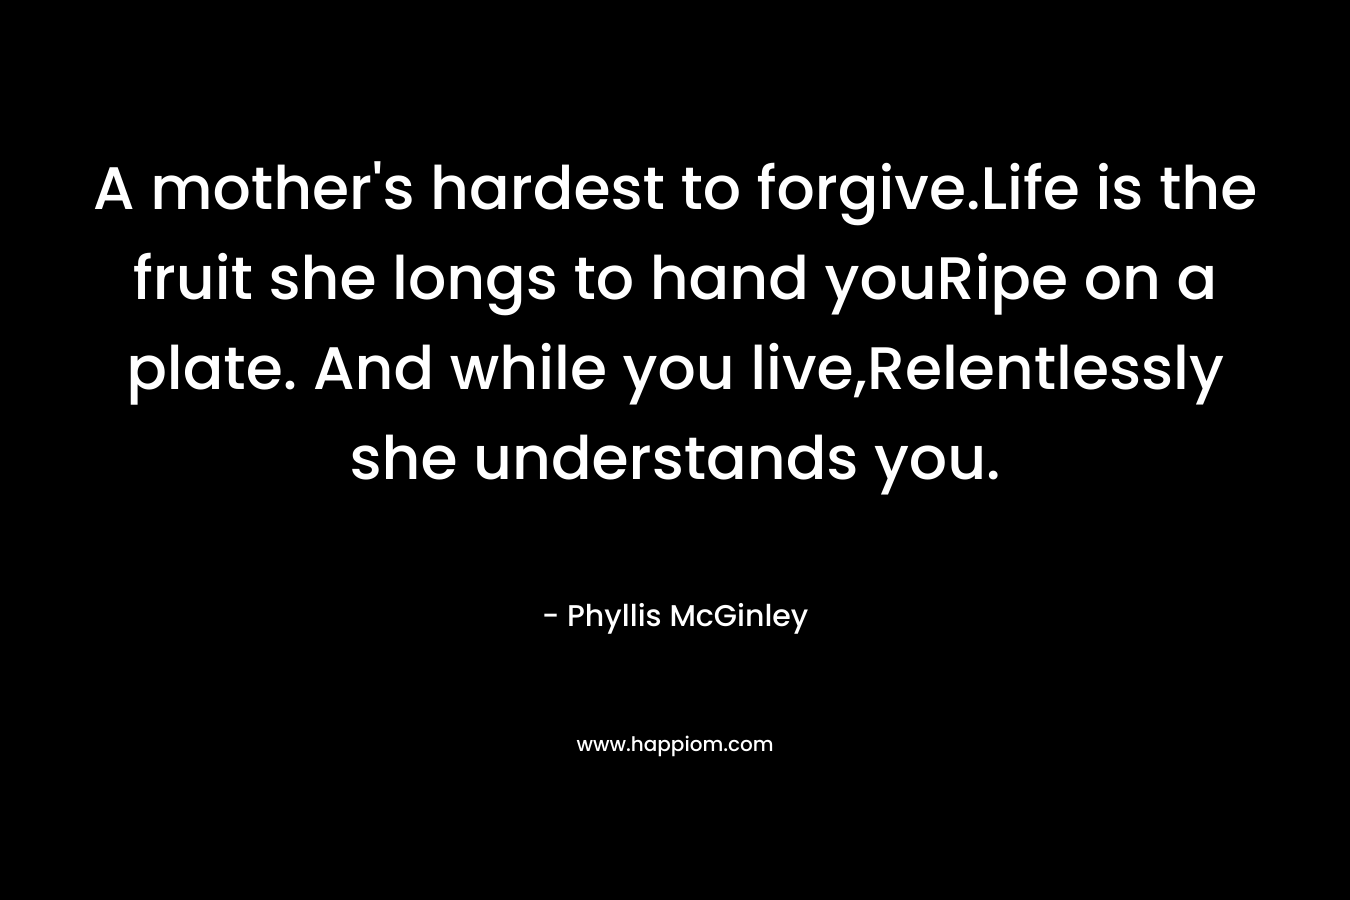 A mother’s hardest to forgive.Life is the fruit she longs to hand youRipe on a plate. And while you live,Relentlessly she understands you. – Phyllis McGinley